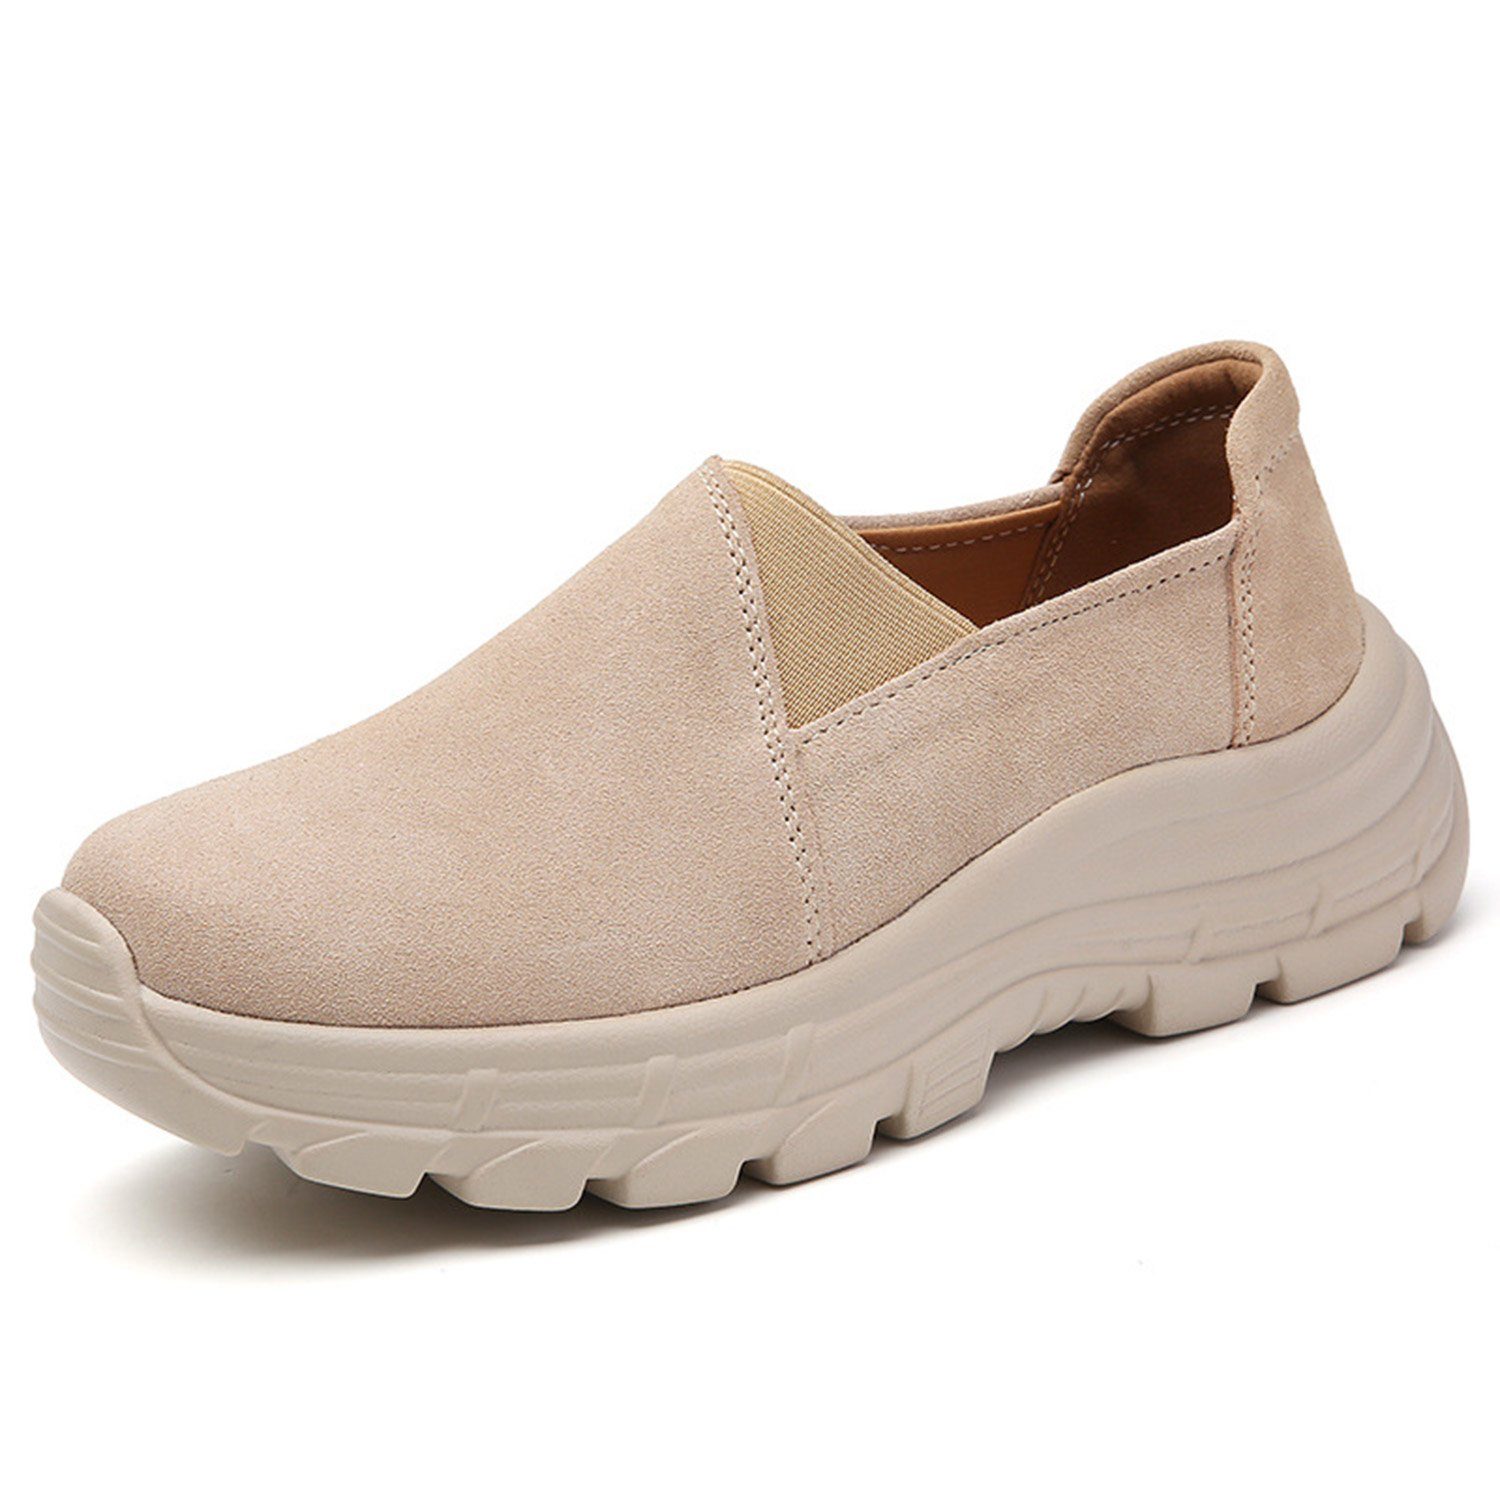 Plateausohle Daisred Sneakers Bequeme mit Aprikose Turnschuhe Loafer